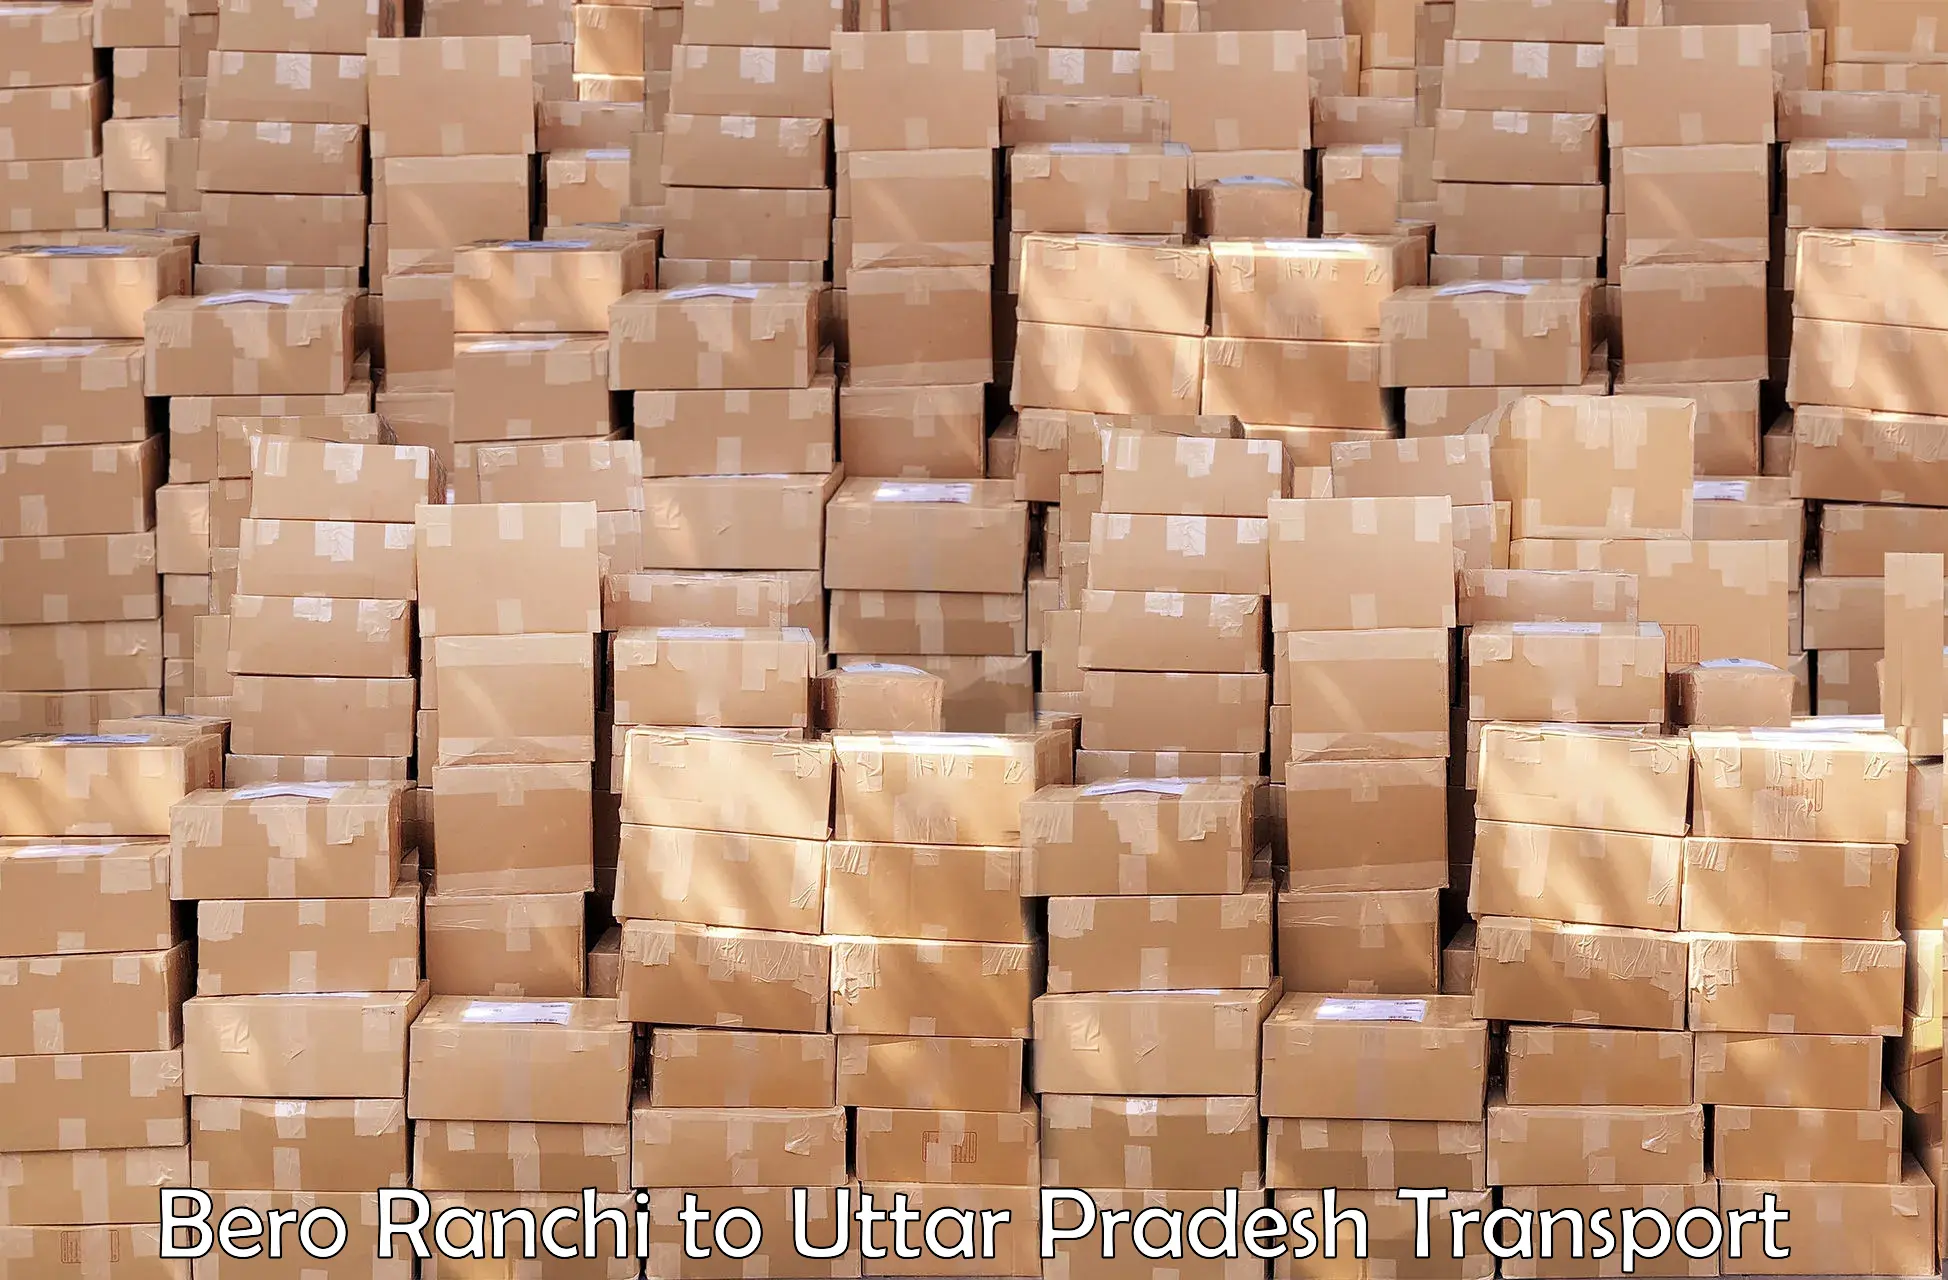 Cargo transport services Bero Ranchi to Lucknow